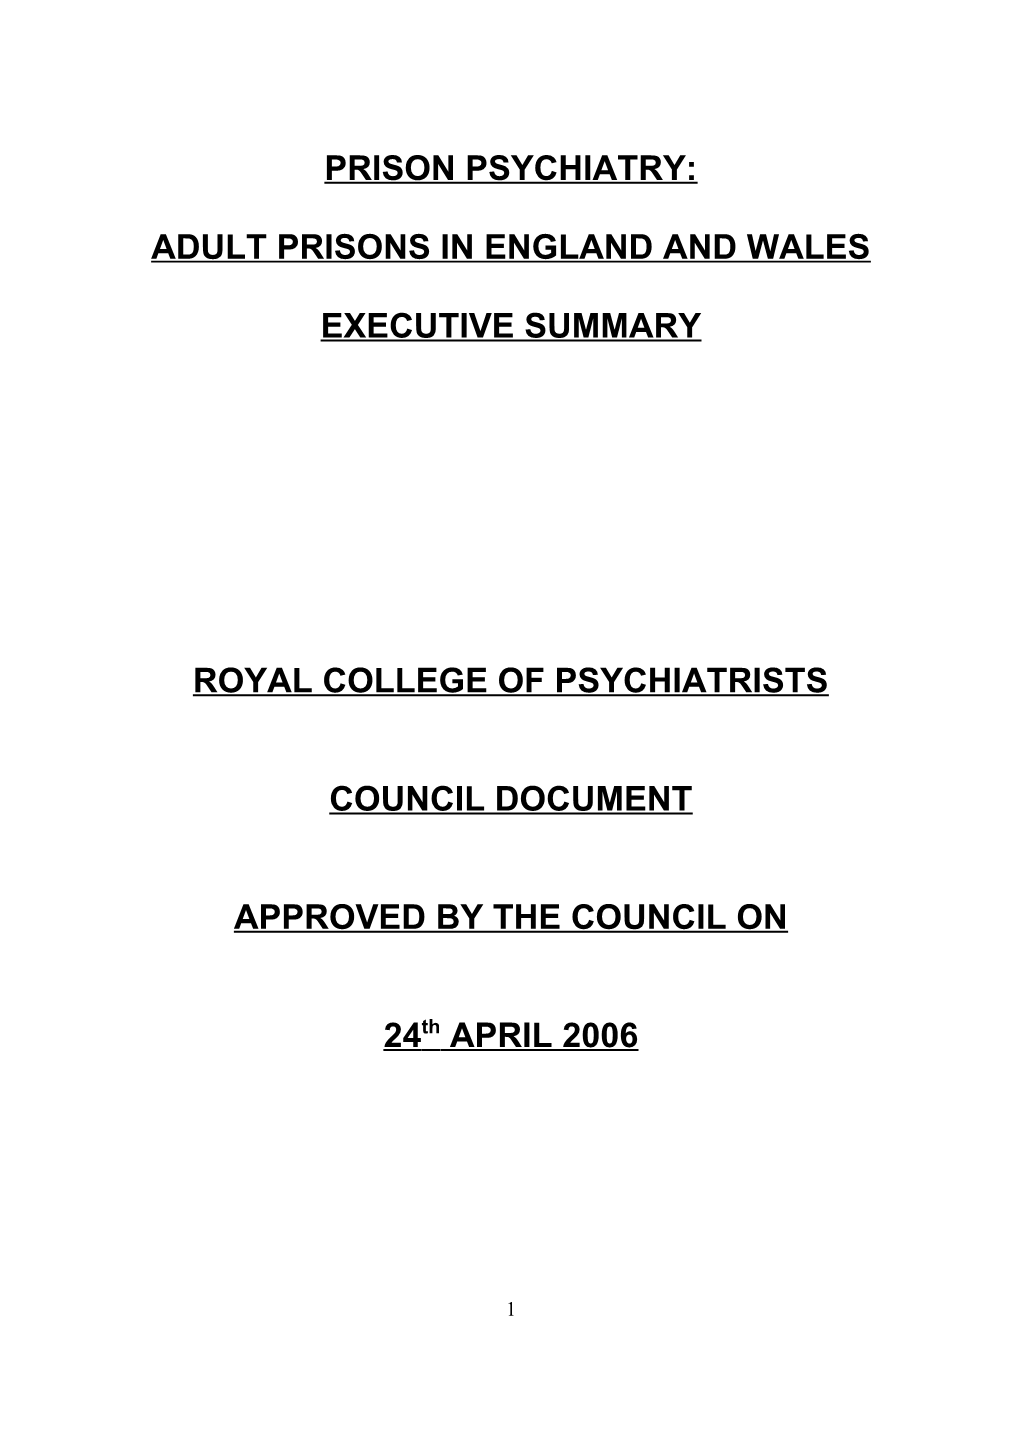 Proposal for a College Statement on Prison Psychiatry